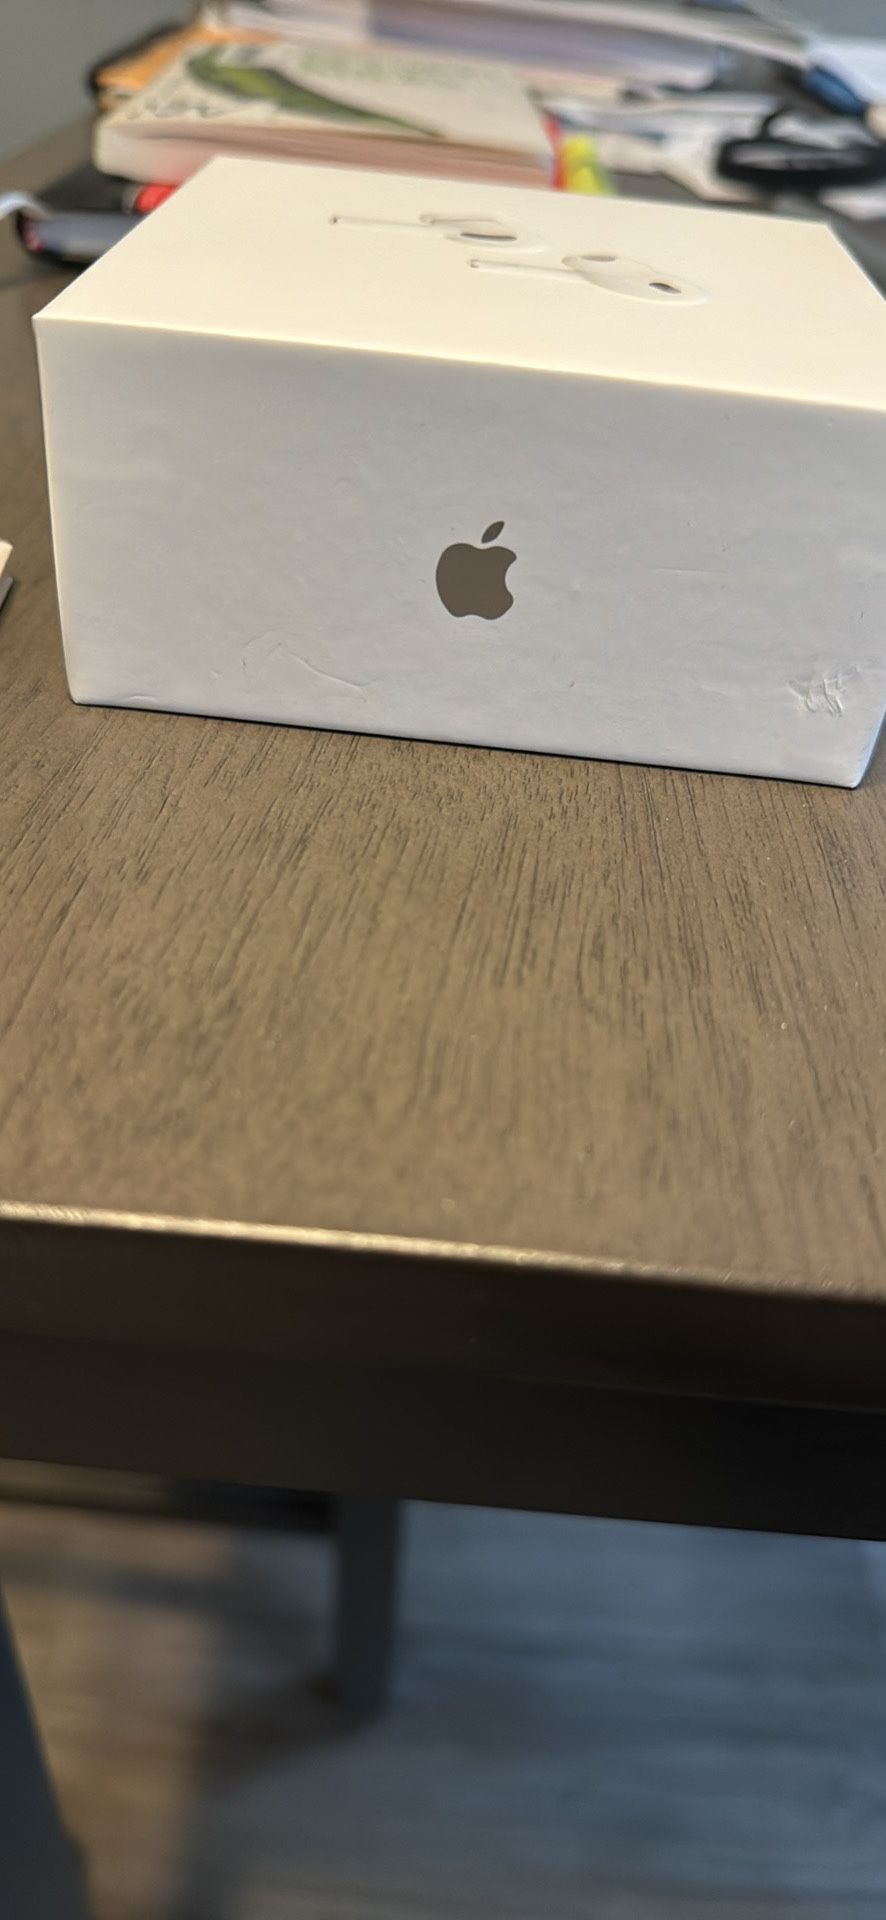 AIRPODS 3 Generation Brand New Sealed In Box  65.00